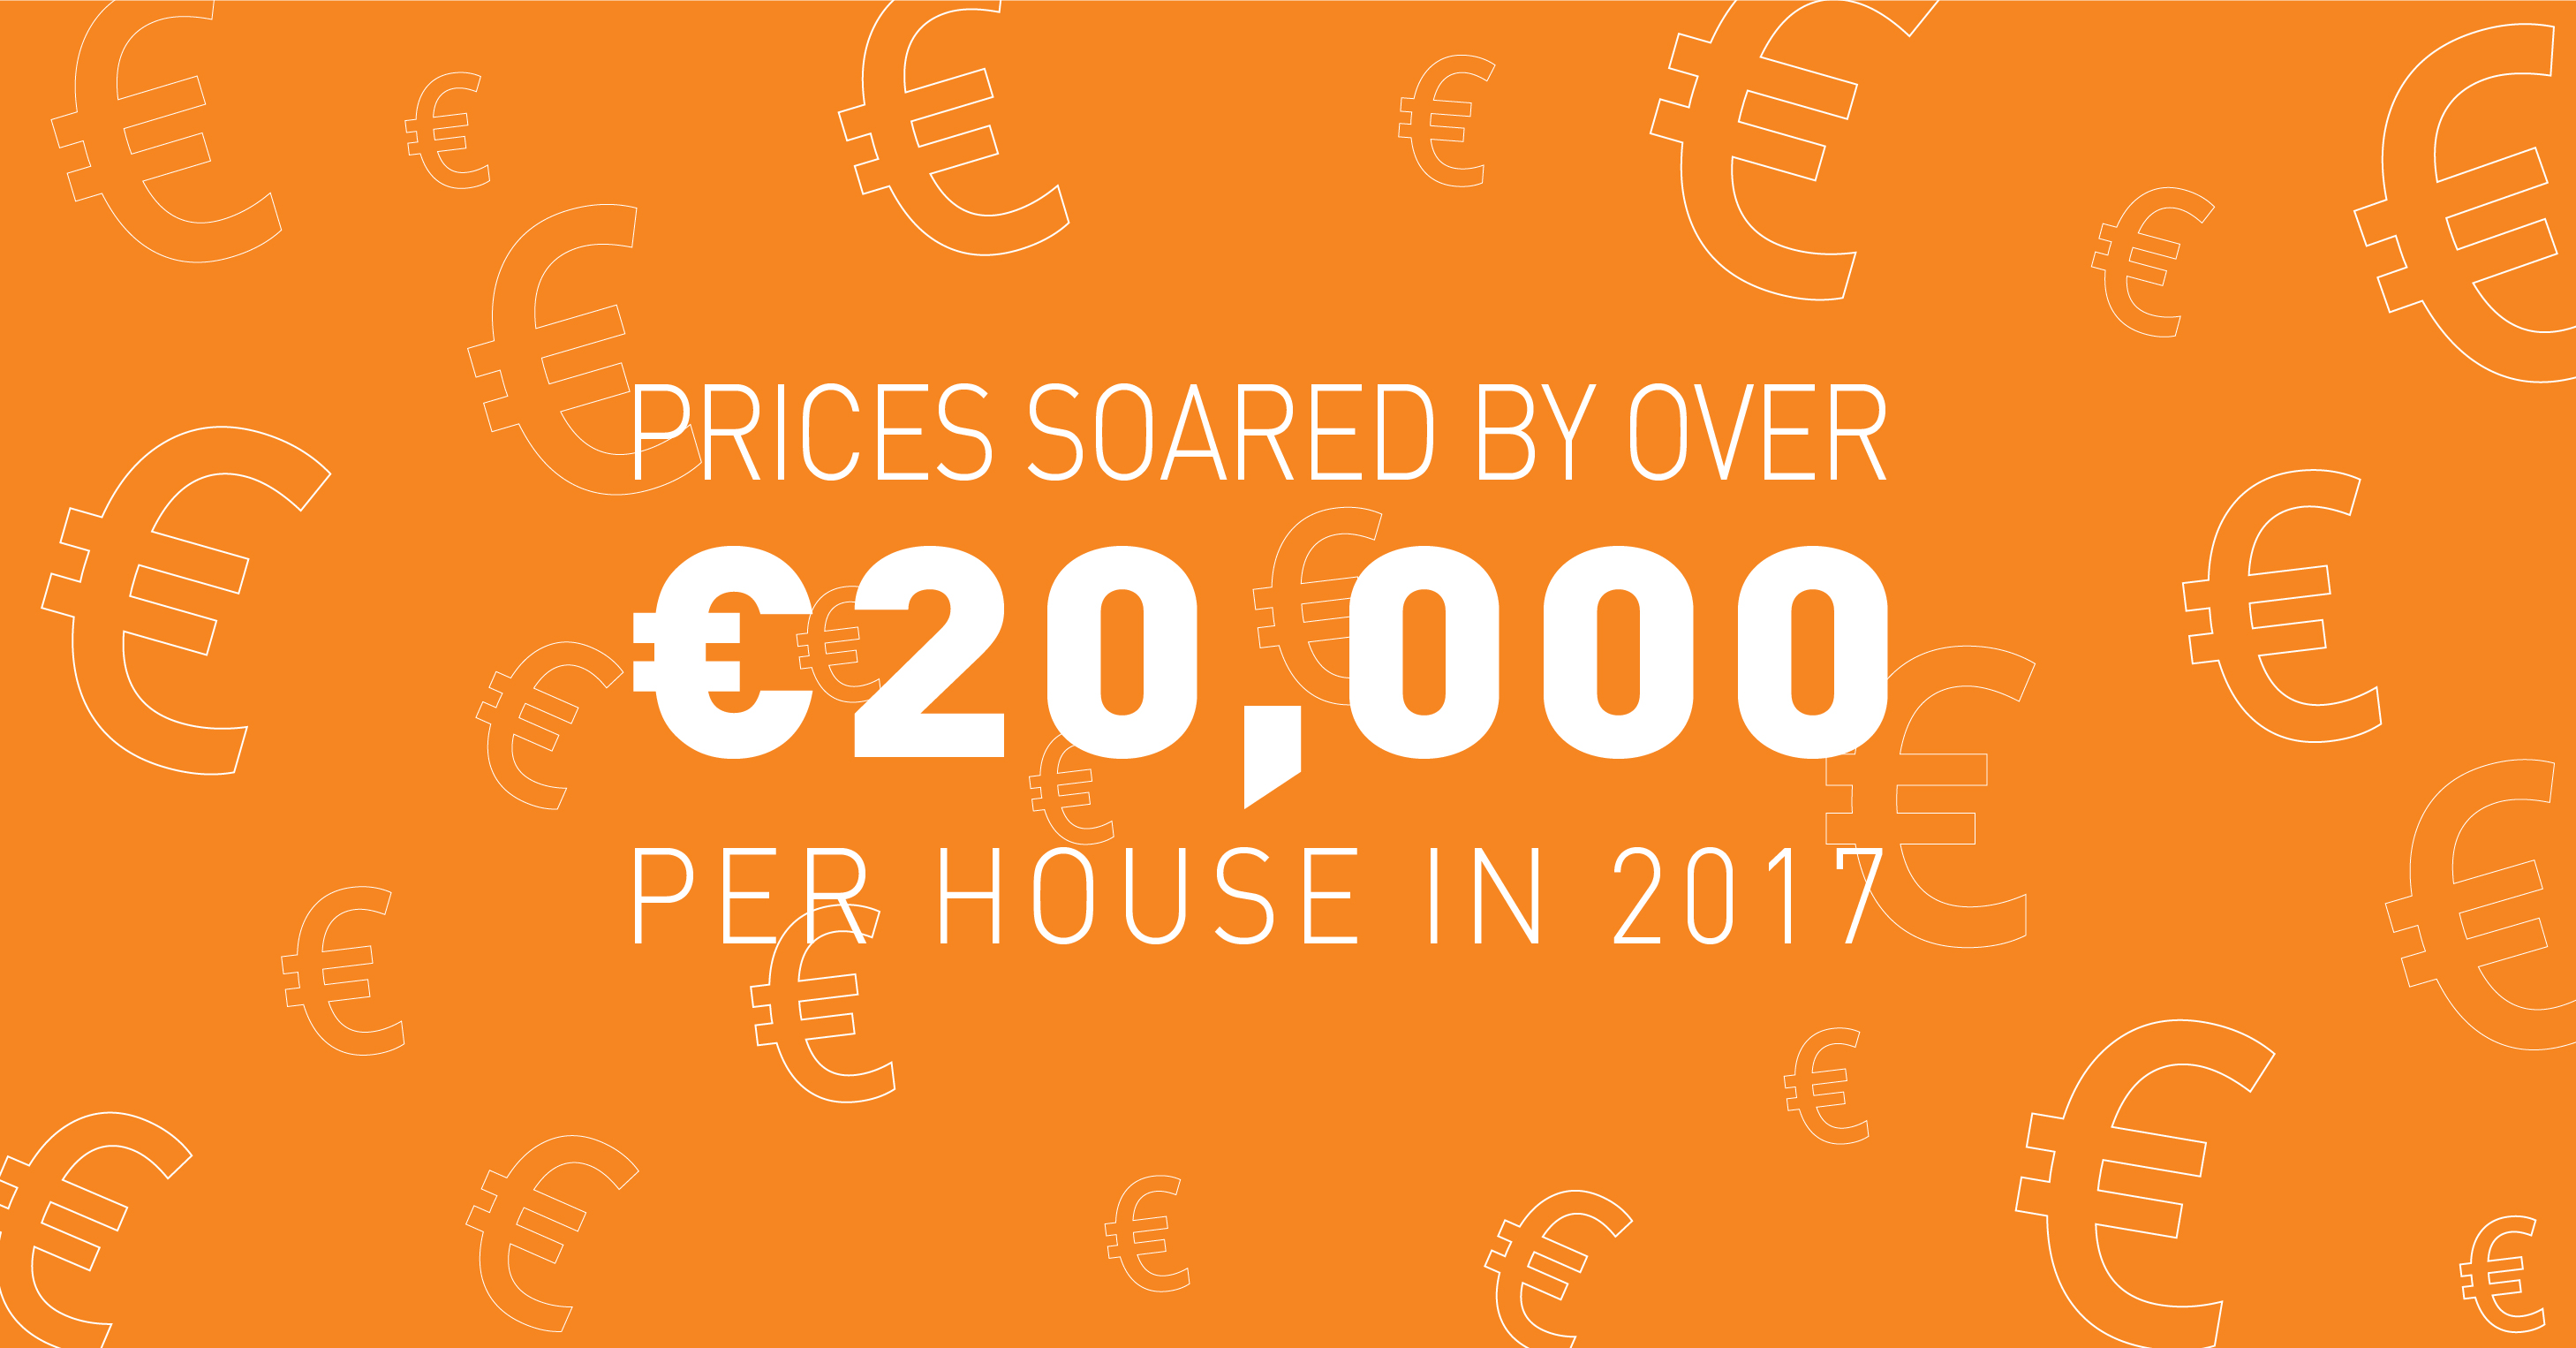 Prices soared by over €20,000 per house in 2017